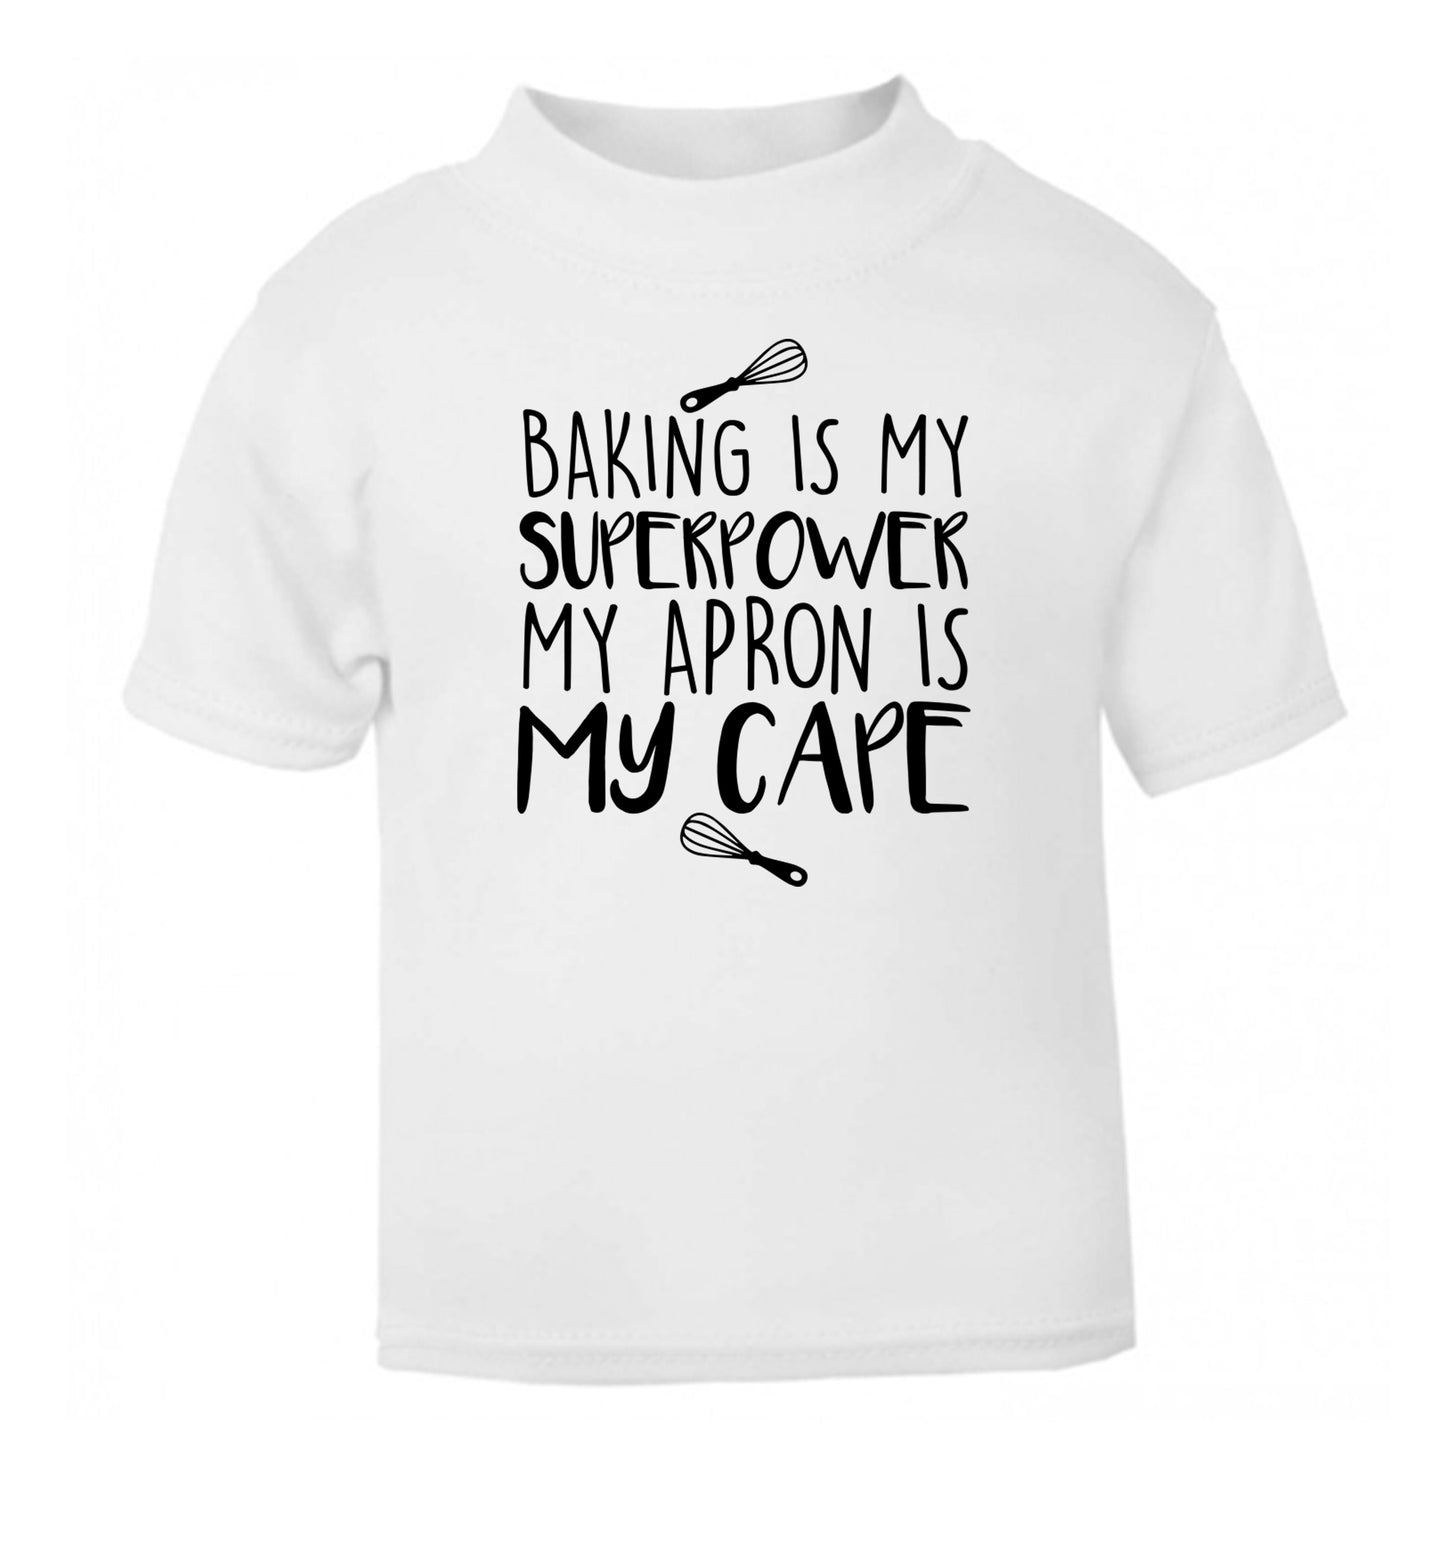 Baking is my superpower my apron is my cape white Baby Toddler Tshirt 2 Years